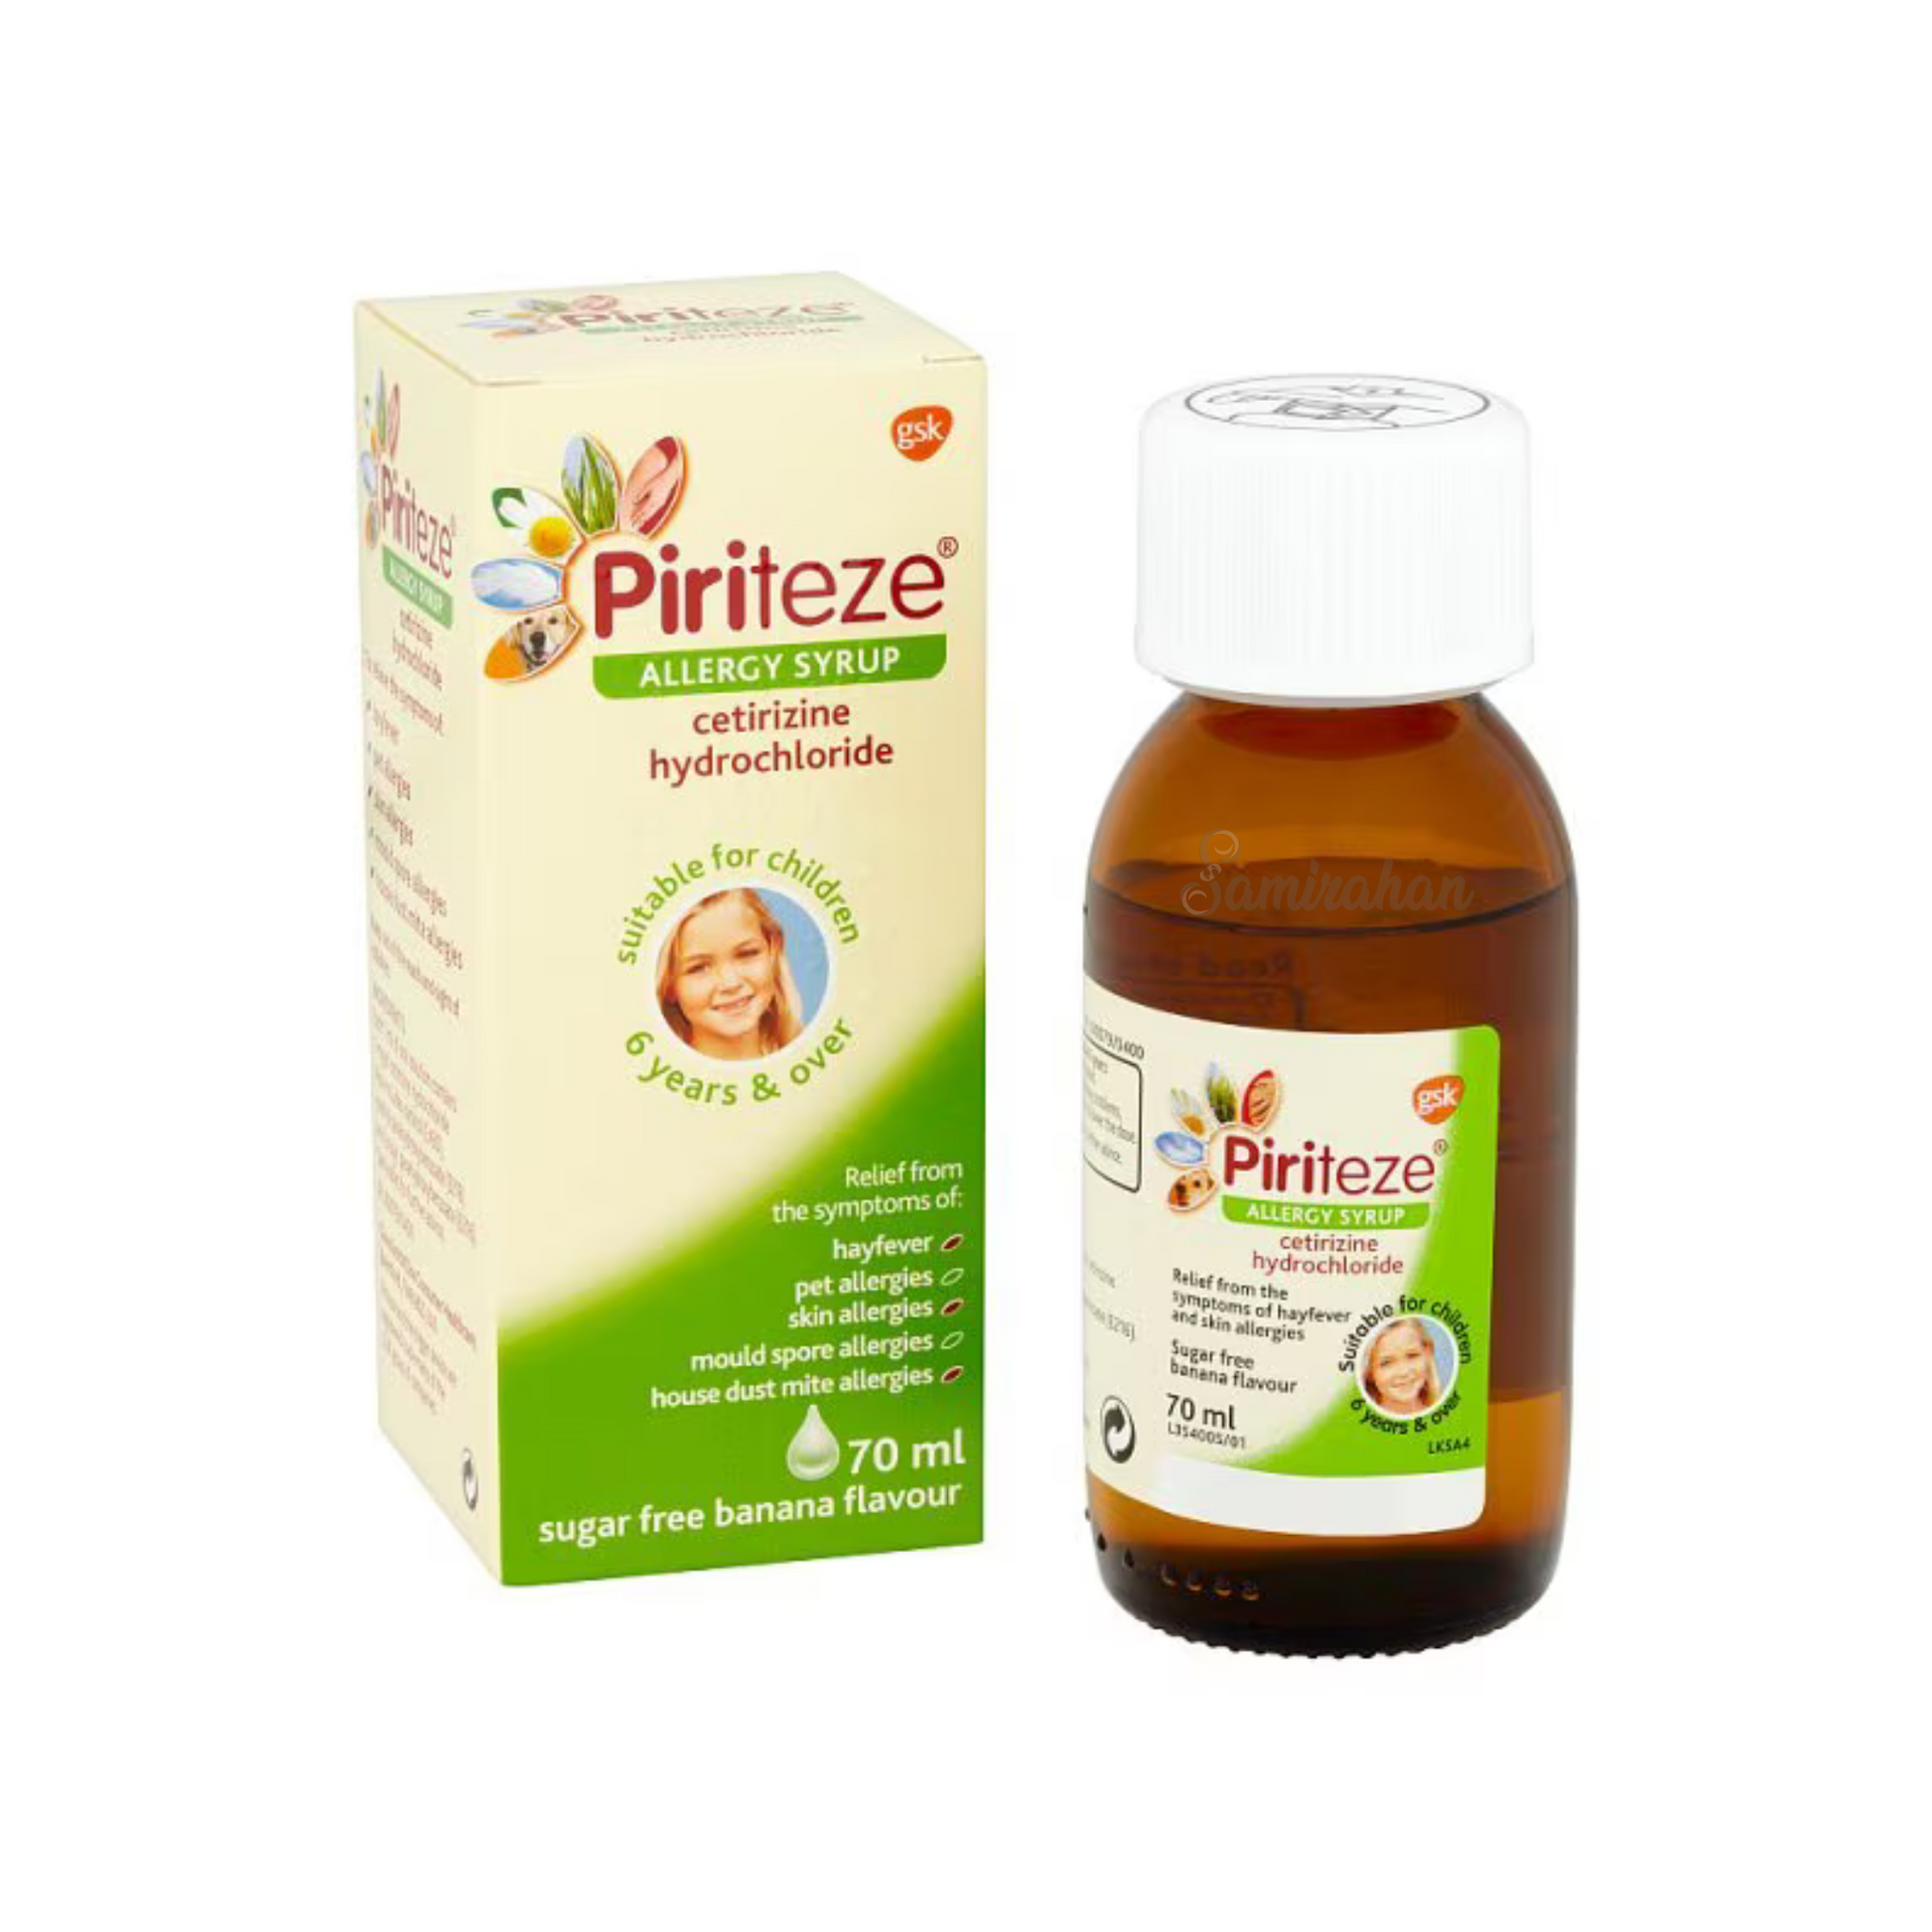 Piriteze Kids Allergy Relief Syrup for hayfever, pet, skin, mould spore & house dust mite allergies. Best imported foreign UK United Kingdom English England genuine authentic real baby care health premium quality cure medicine antihistamine treatment cheap price in Dhaka Chittagong Sylhet Barisal Manikganj Bangladesh